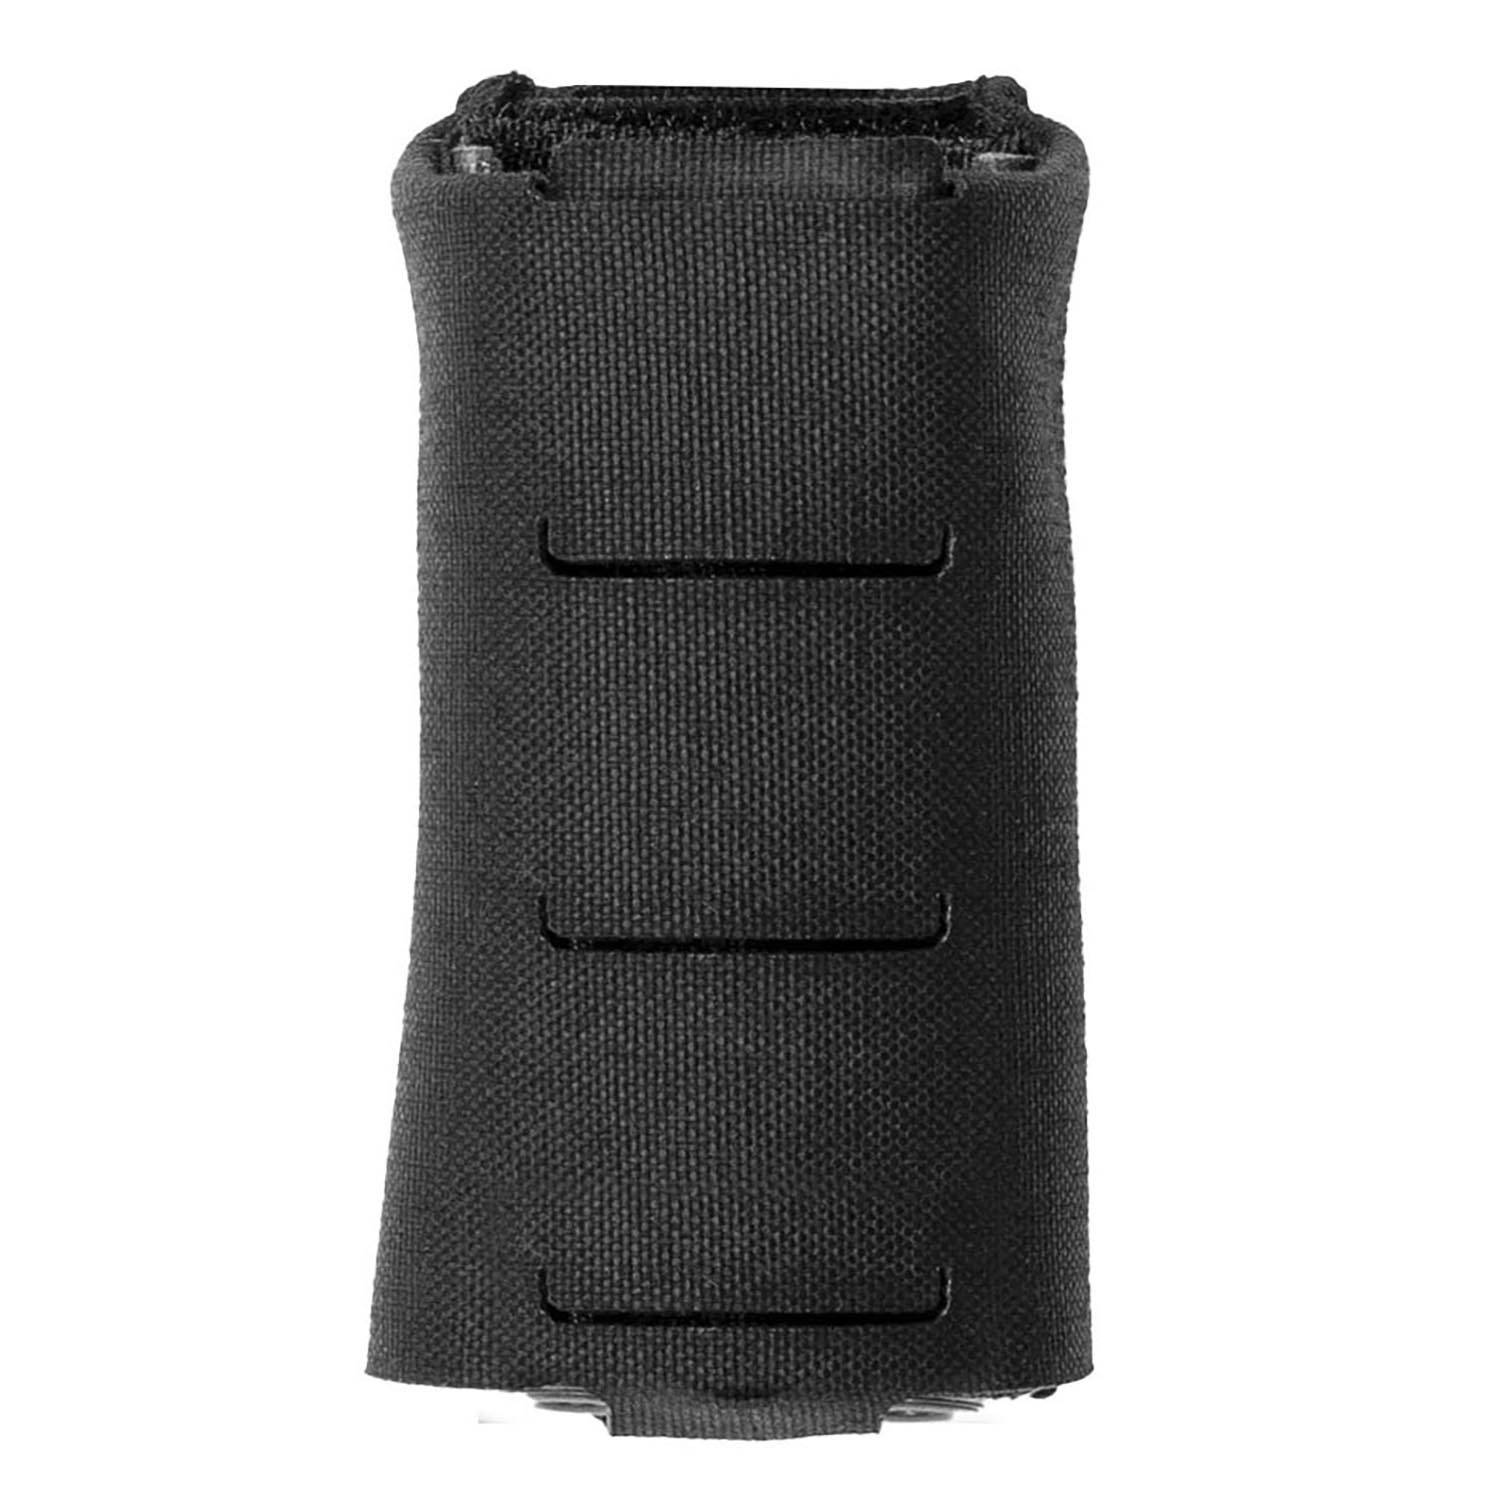 POINT BLANK SINGLE PISTOL MAG POUCH WITH TANK TRACK